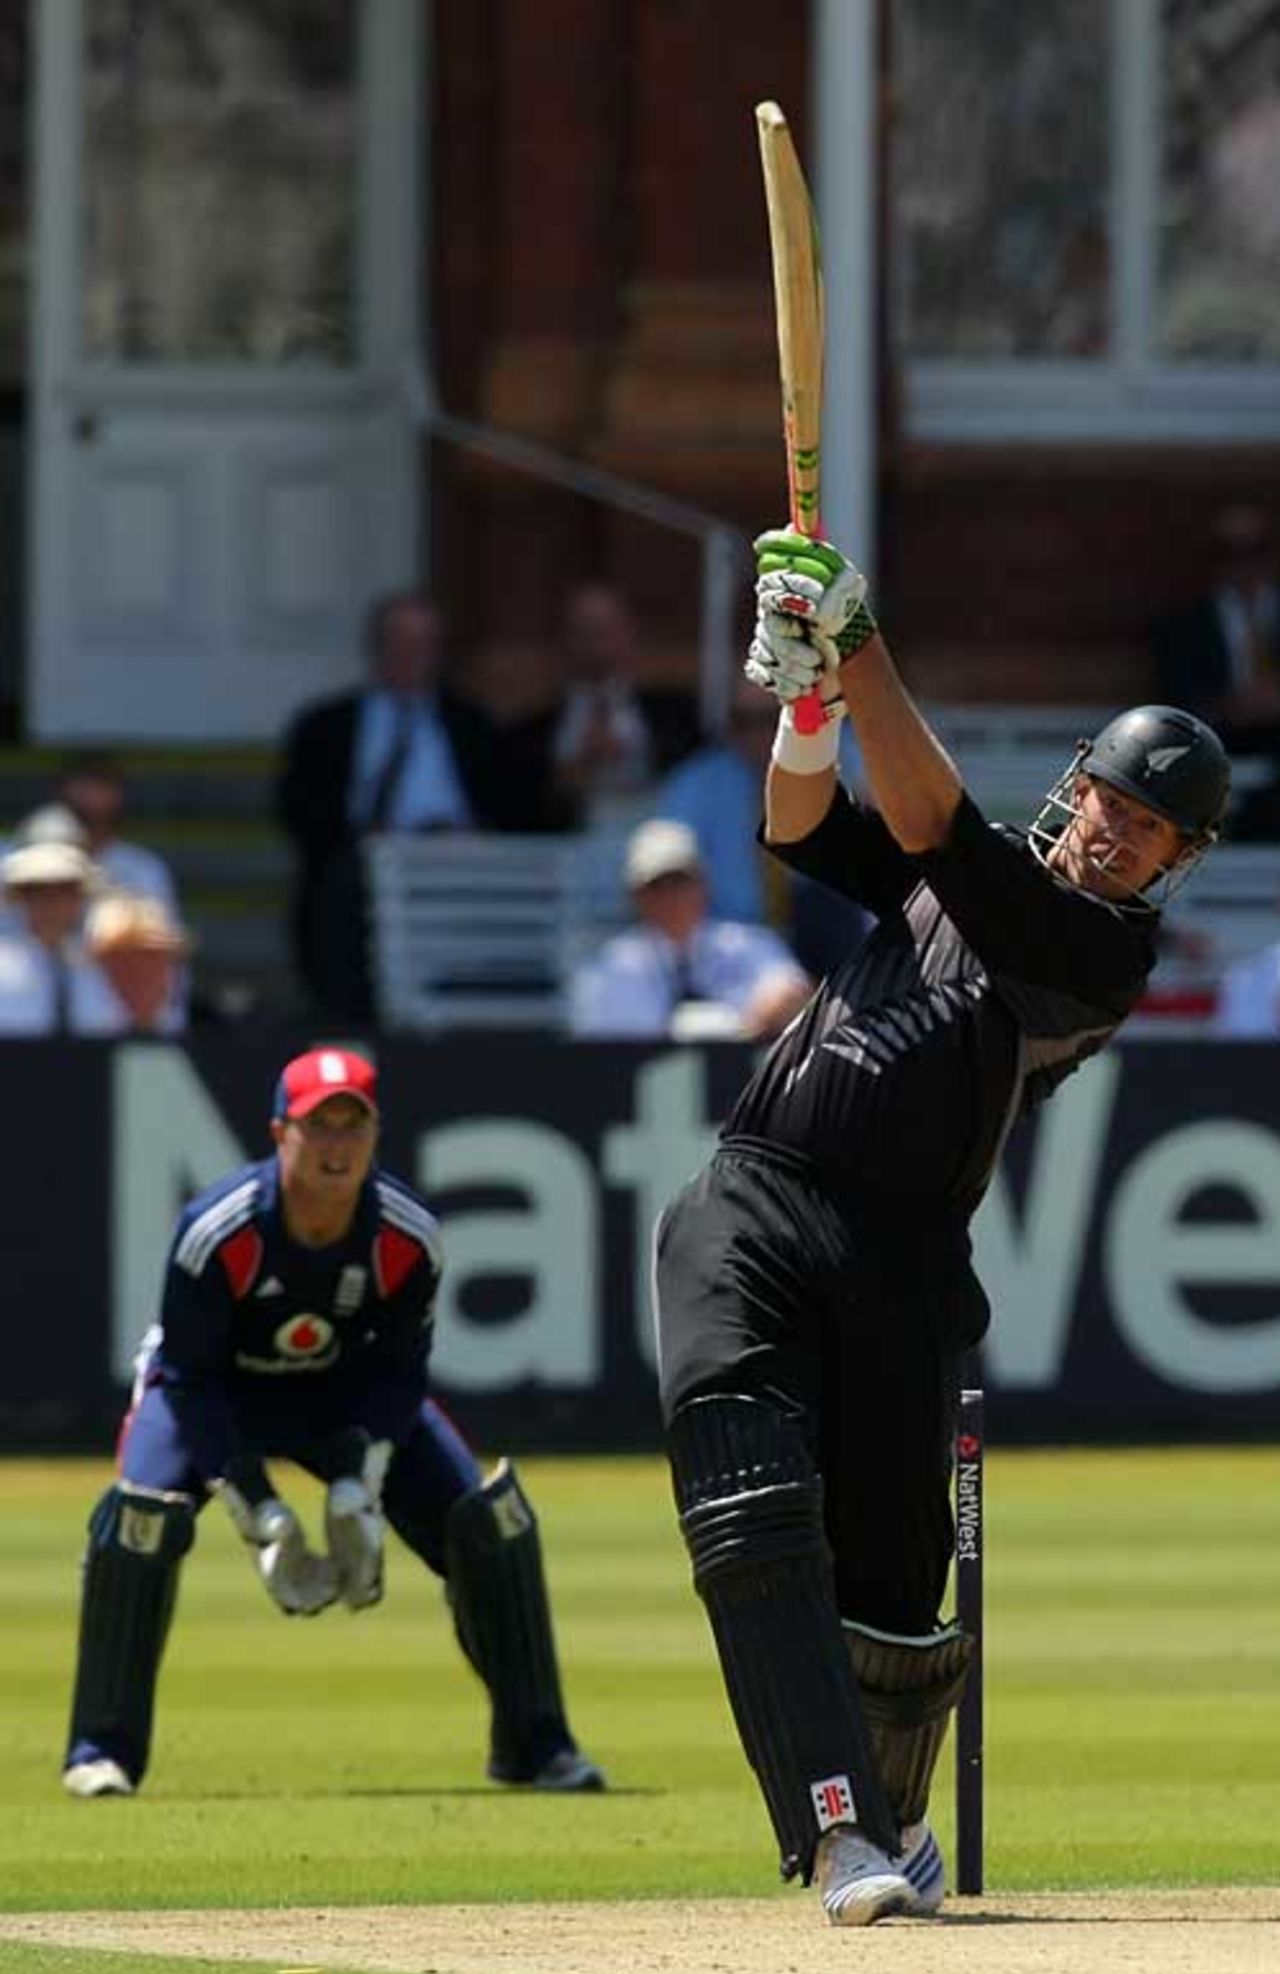 Jacob Oram launches a six over long-on, England v New Zealand, 5th ODI, Lord's, June 28, 2008